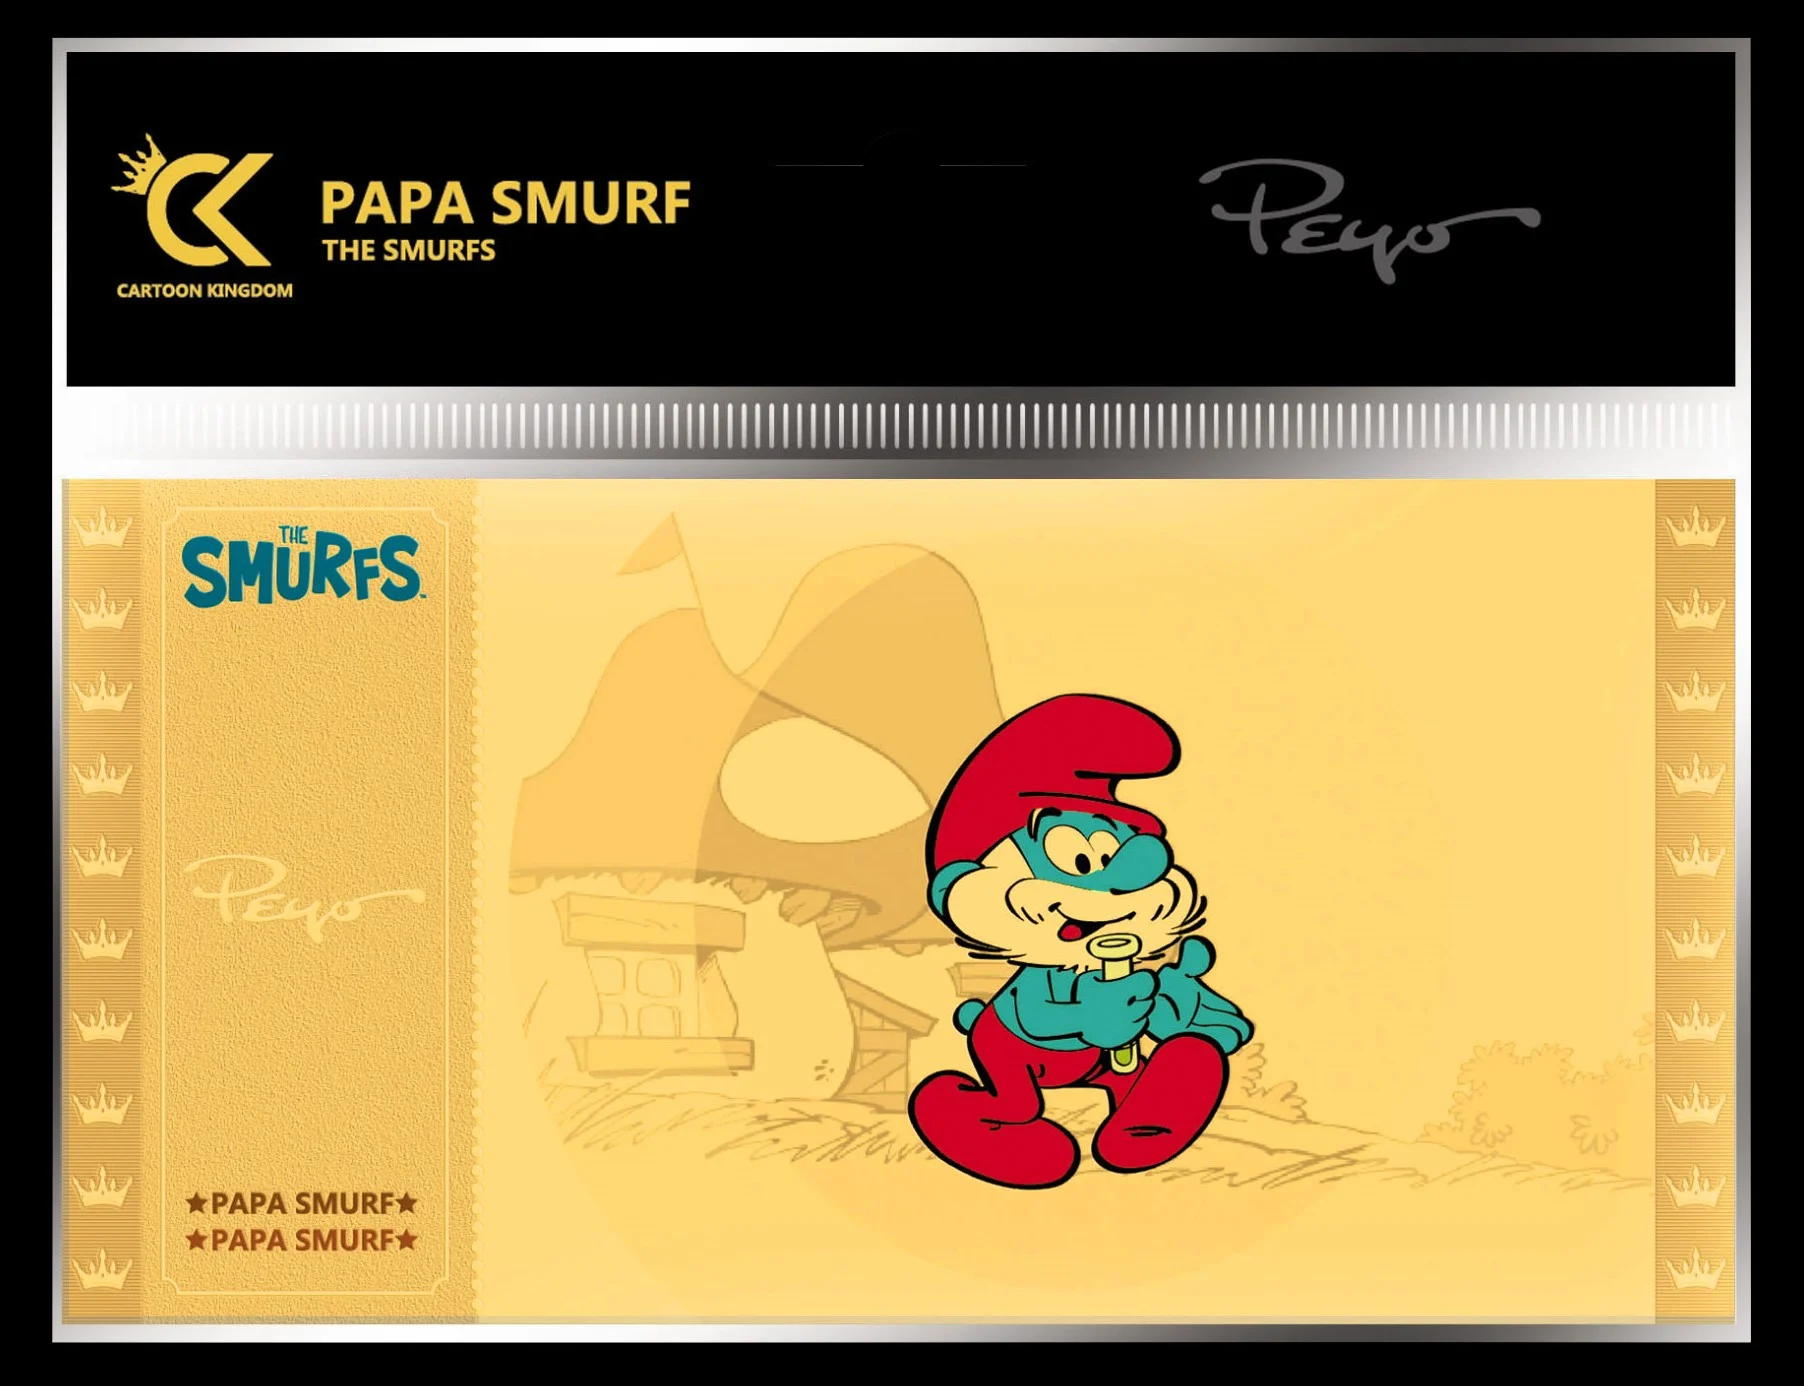 THE SMURFS - Papa Smurf (Grote Smurf) - Golden Ticket CK-TS01